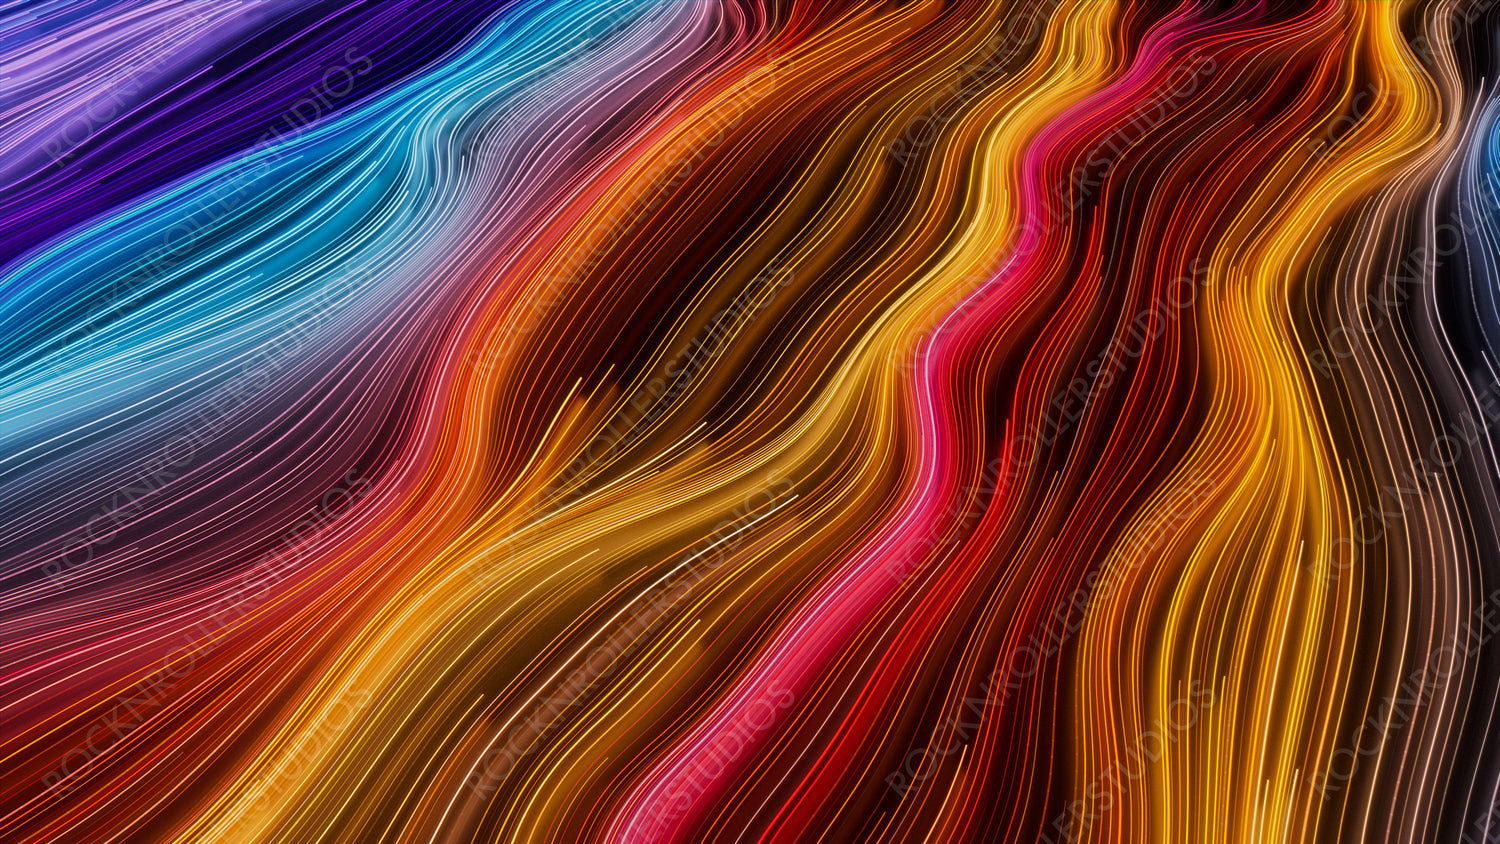 Wavy Neon Background with Orange, Pink and Turquoise Streaks. 3D Render.